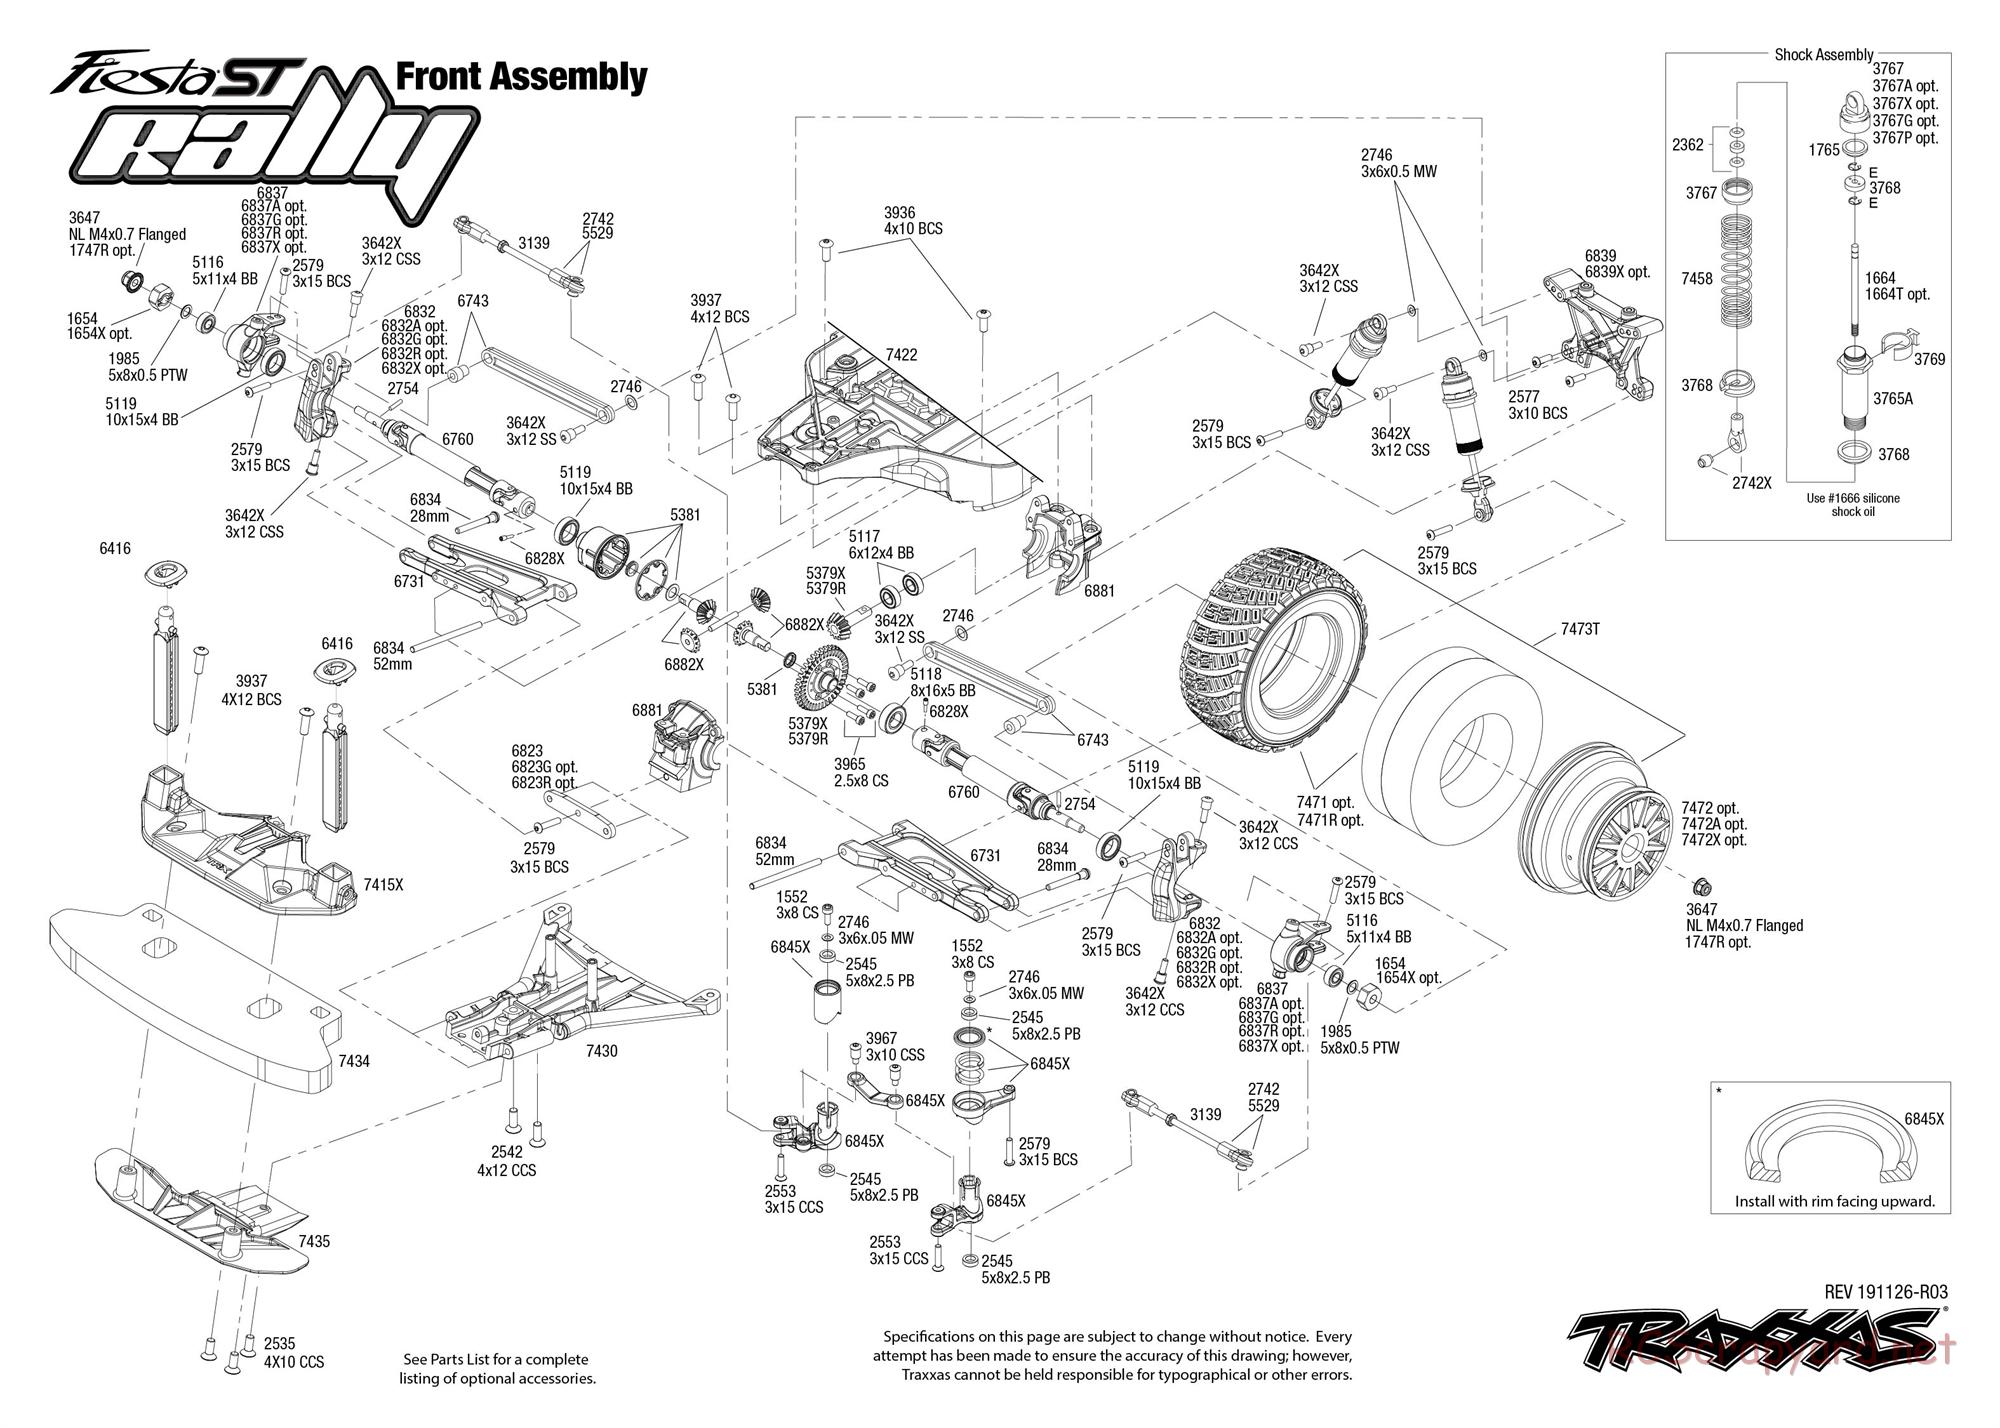 Traxxas - VR46 Ford Fiesta ST Rally SE (2018) - Exploded Views - Page 3